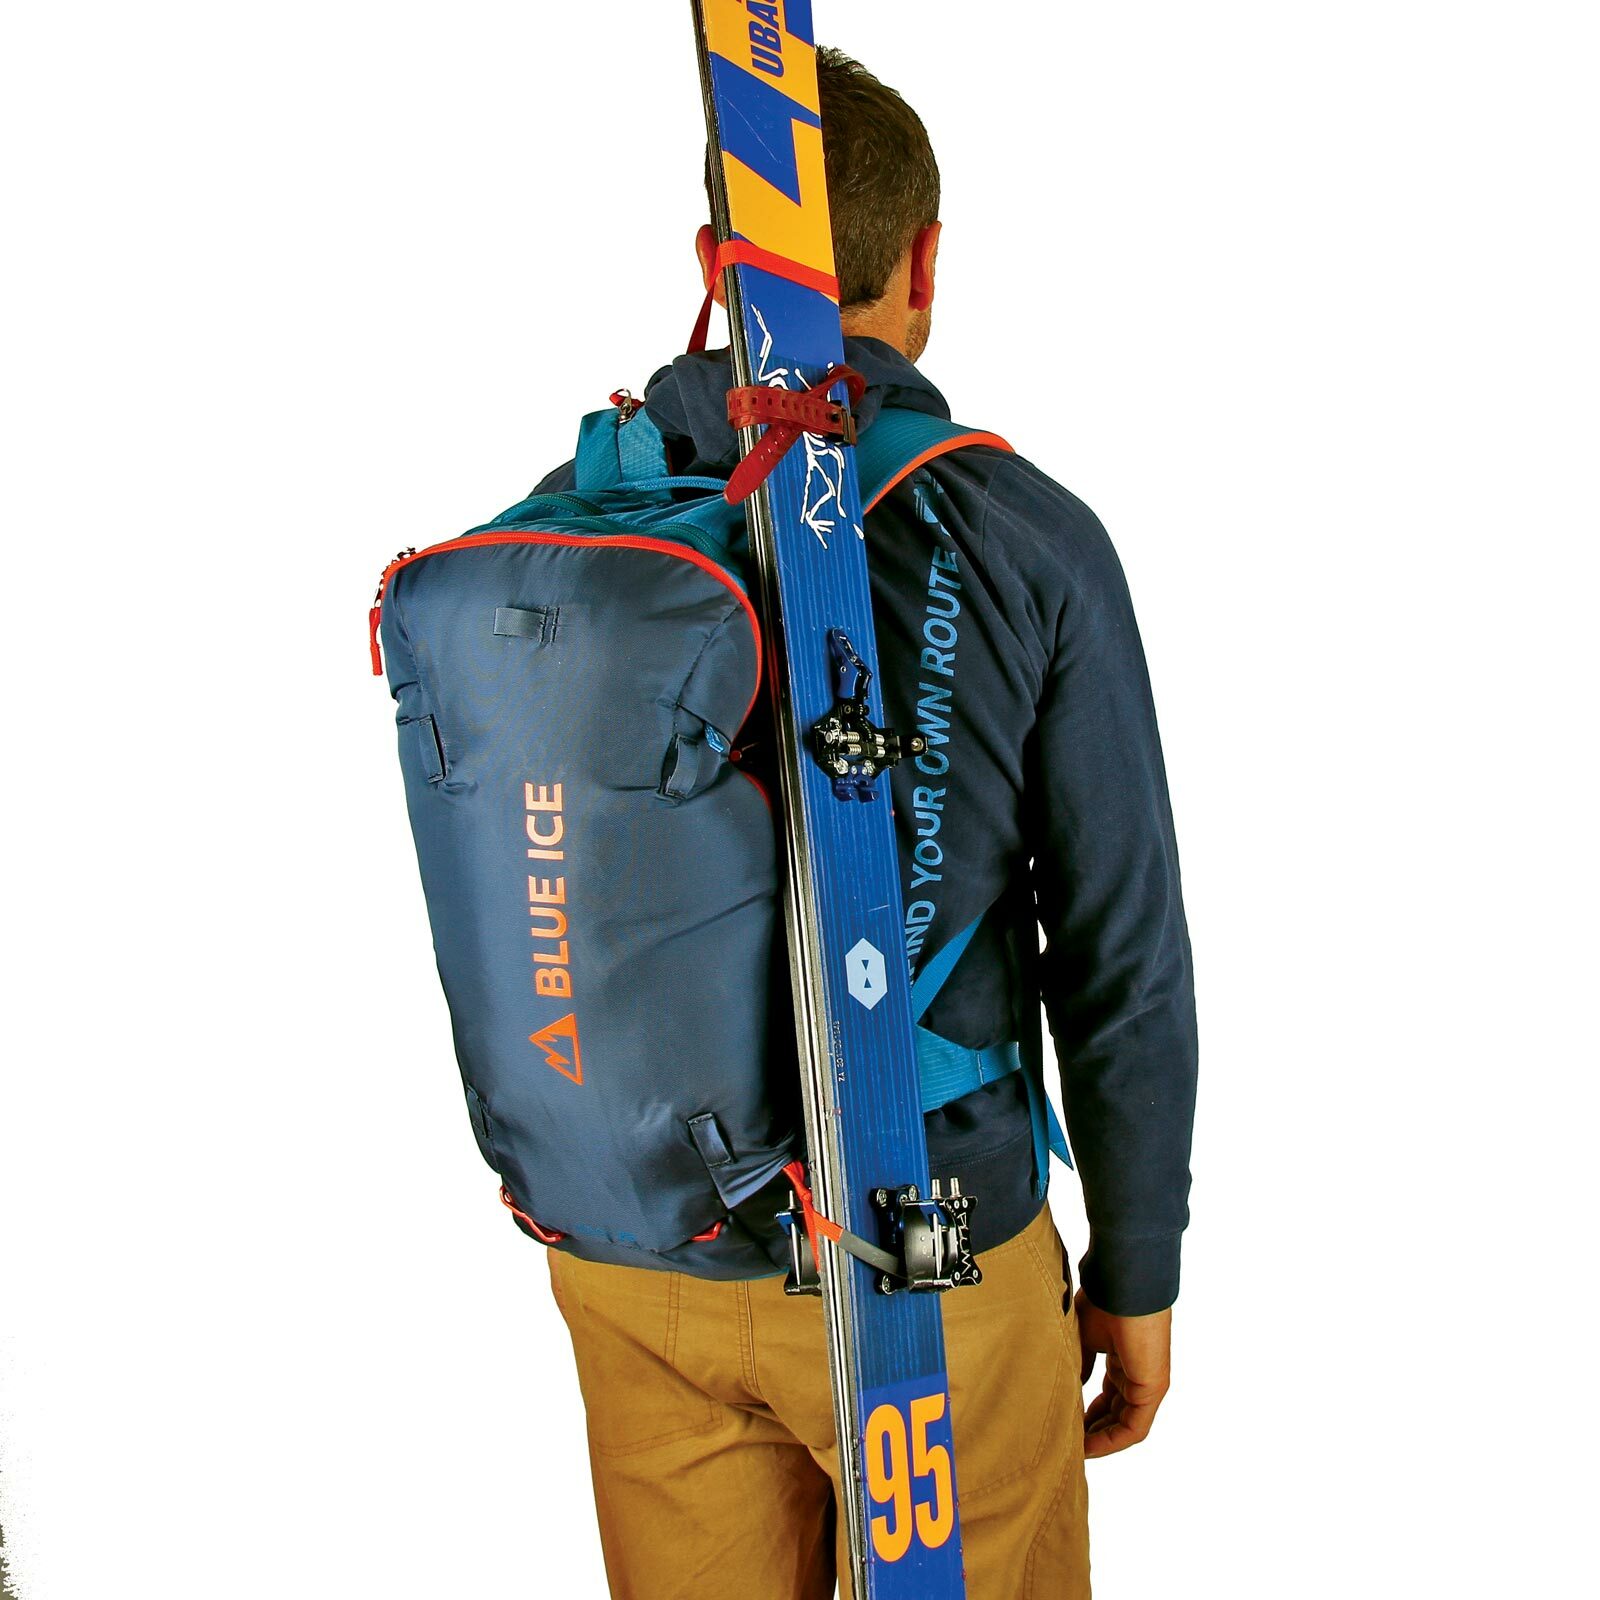 25L Backpack for Freeriding and Ski Touring - YAGI – Blue Ice